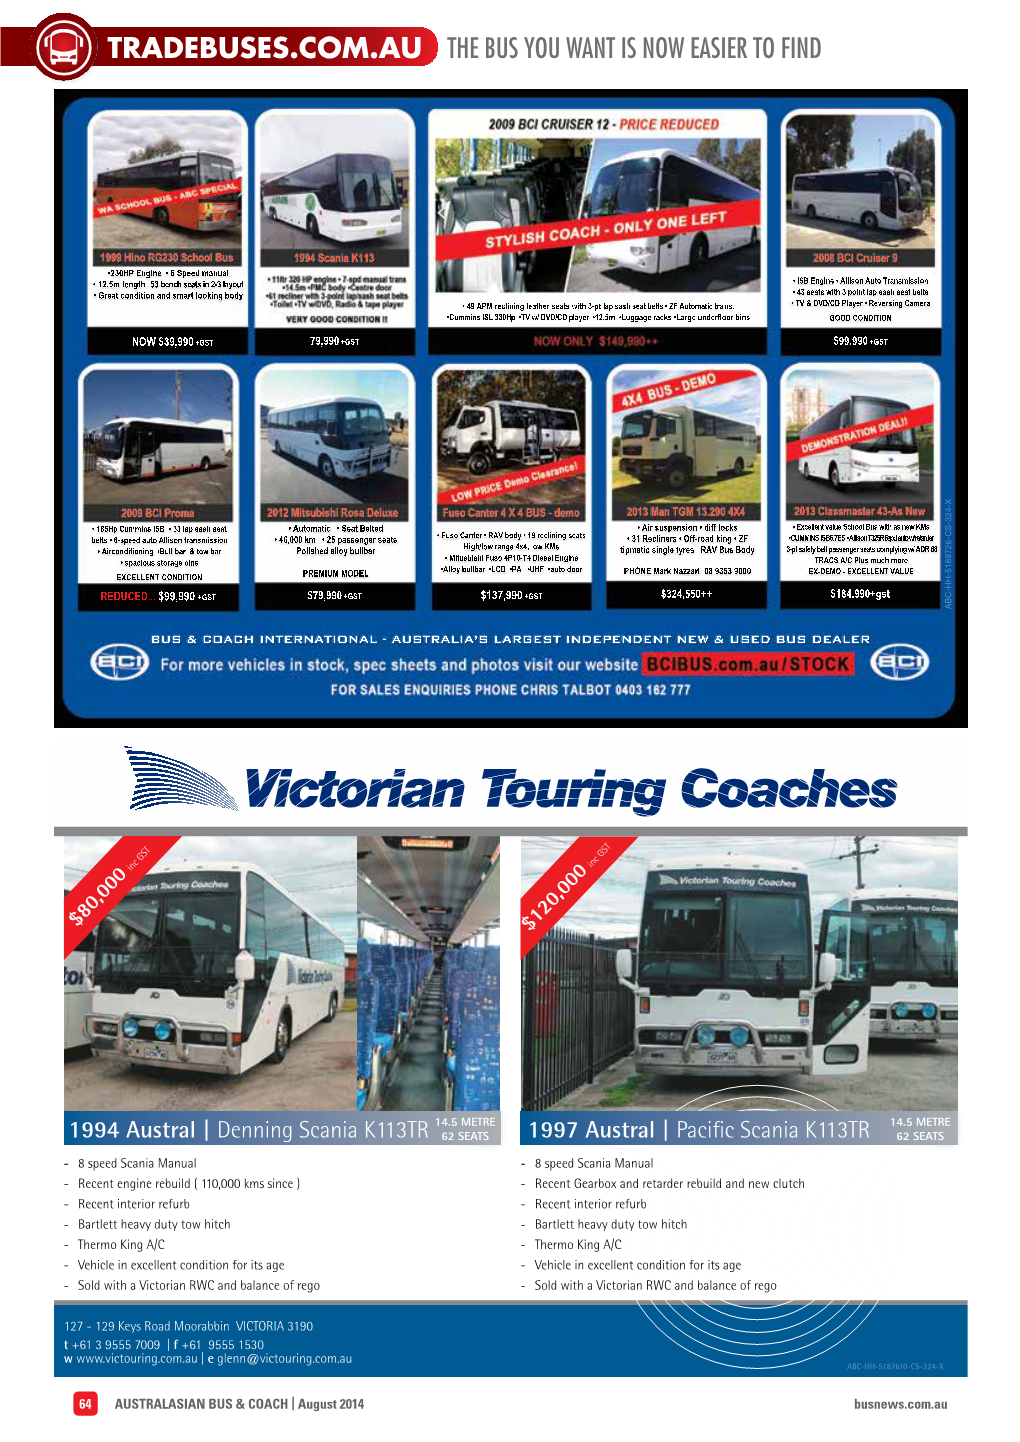 Tradebuses.Com.Au the Bus You Want Is Now Easier to Find